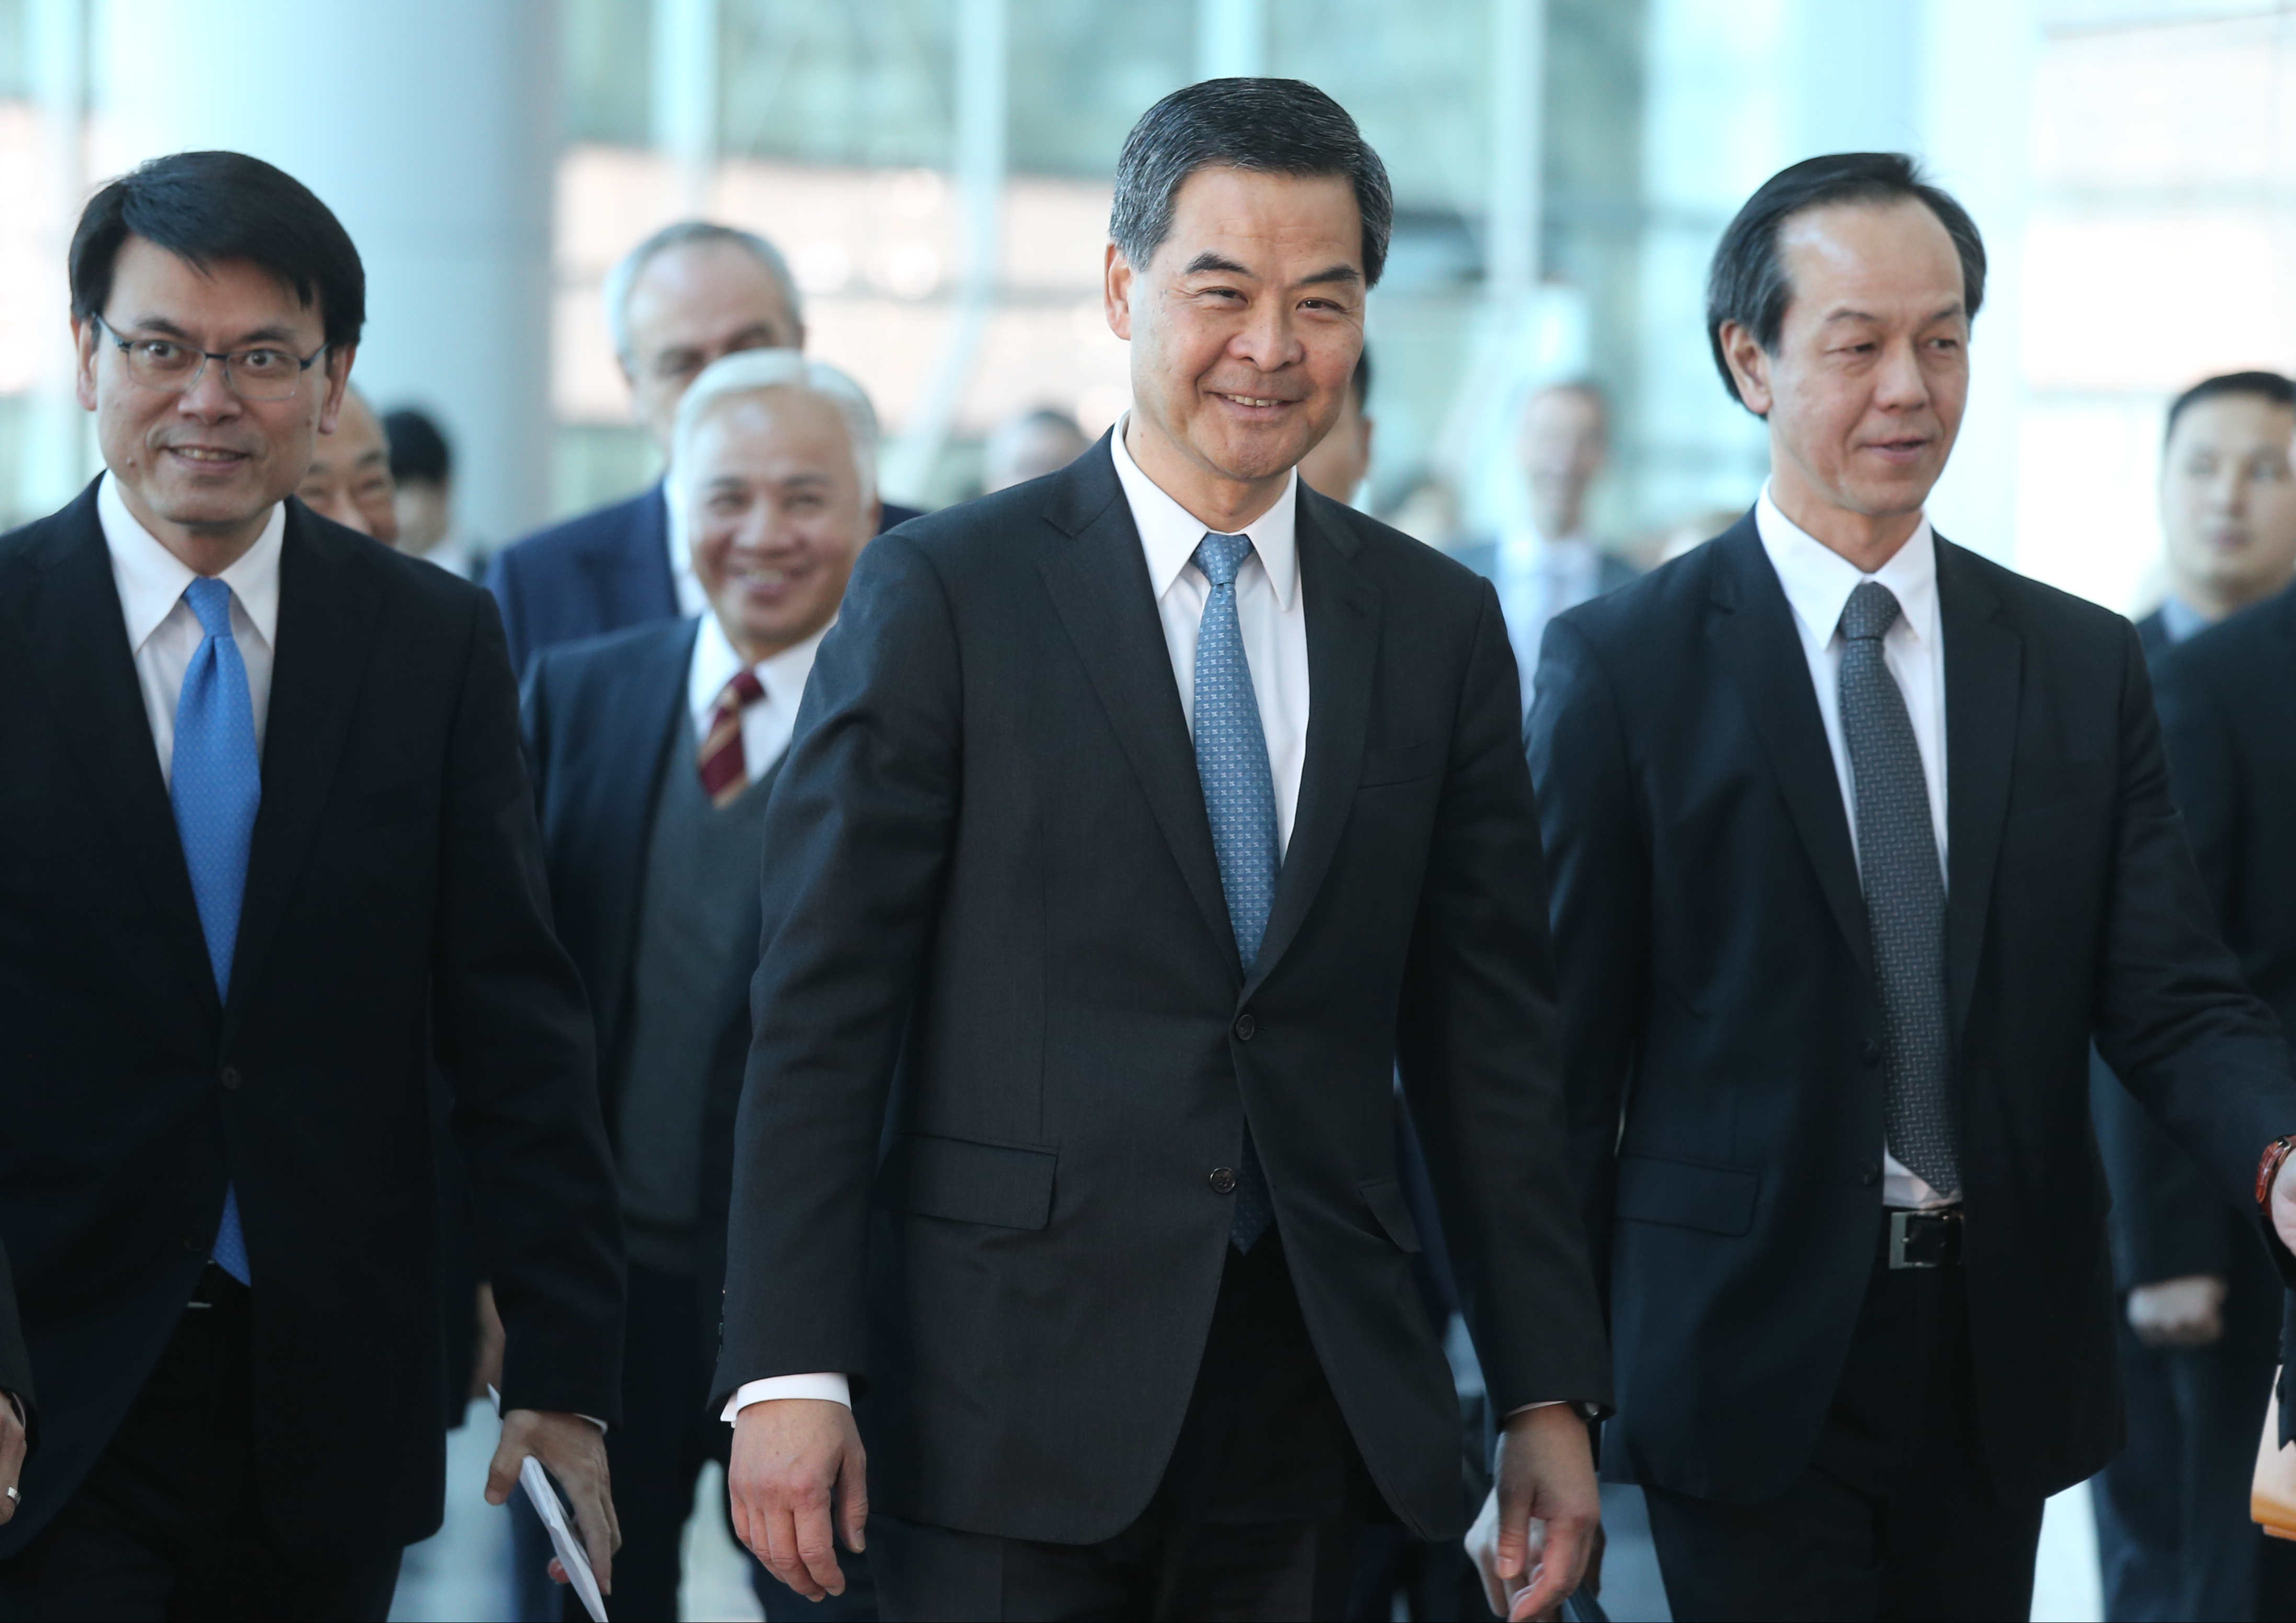 Chief Executive Leung Chun-ying meets business leaders accompanied by Edward Yau Tang-wah (left), director of the Chief Executive's Office. Photo: K.Y. Cheng